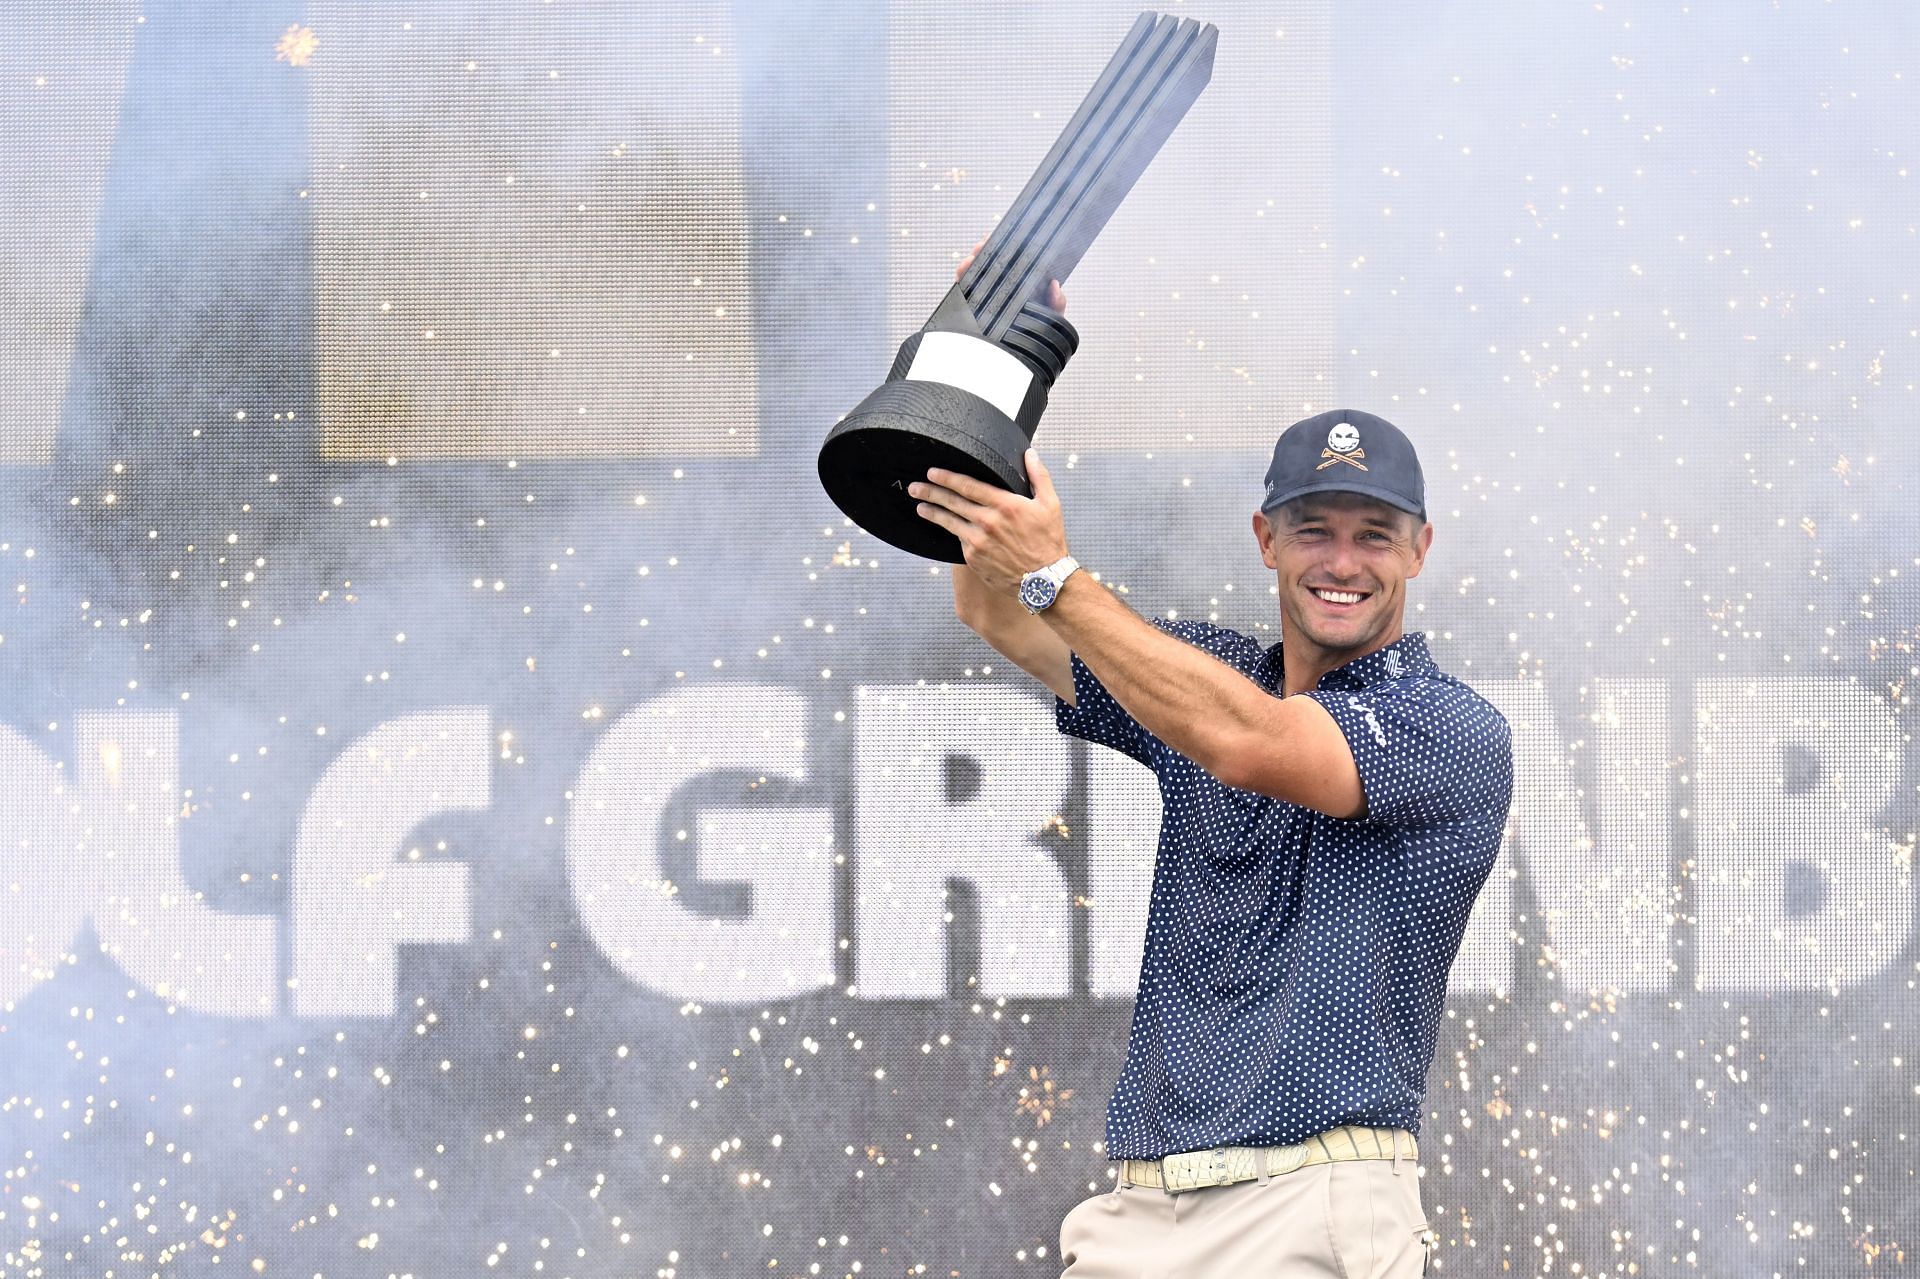 Bryson DeChambeau poses with the trophy after winning the LIV Golf Greenbrier